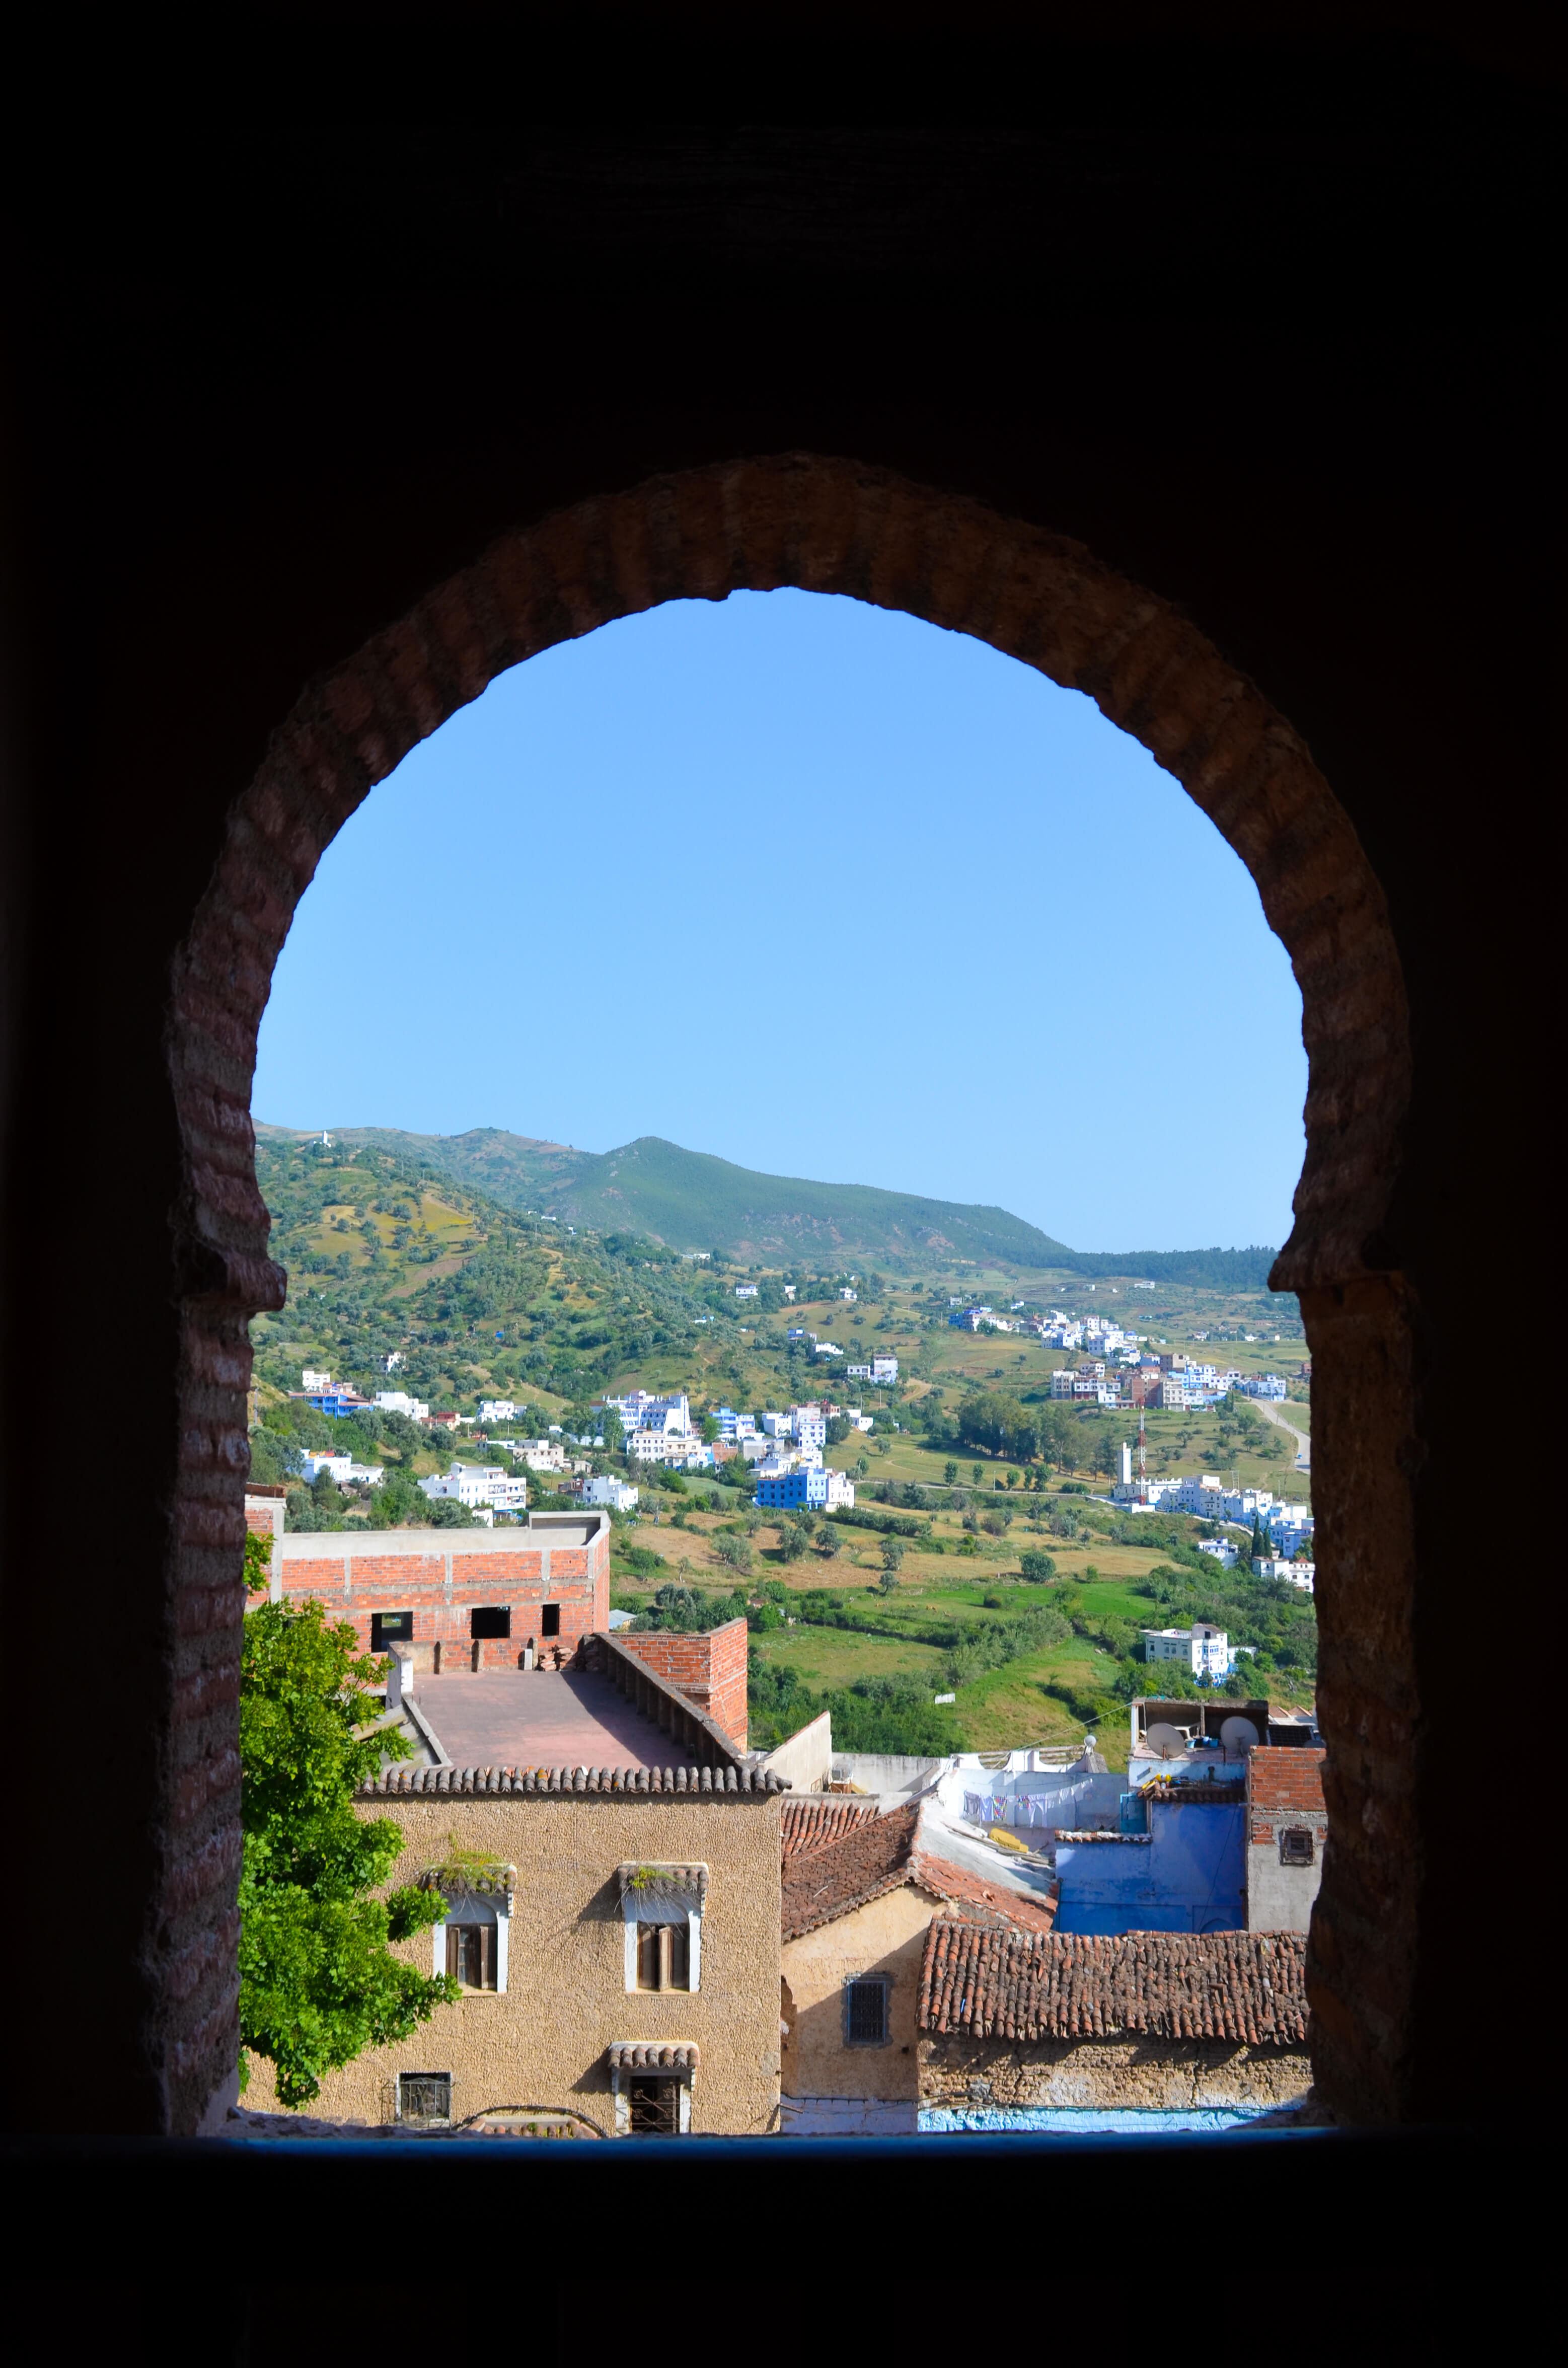 Views of Chefchaouen, Morocco